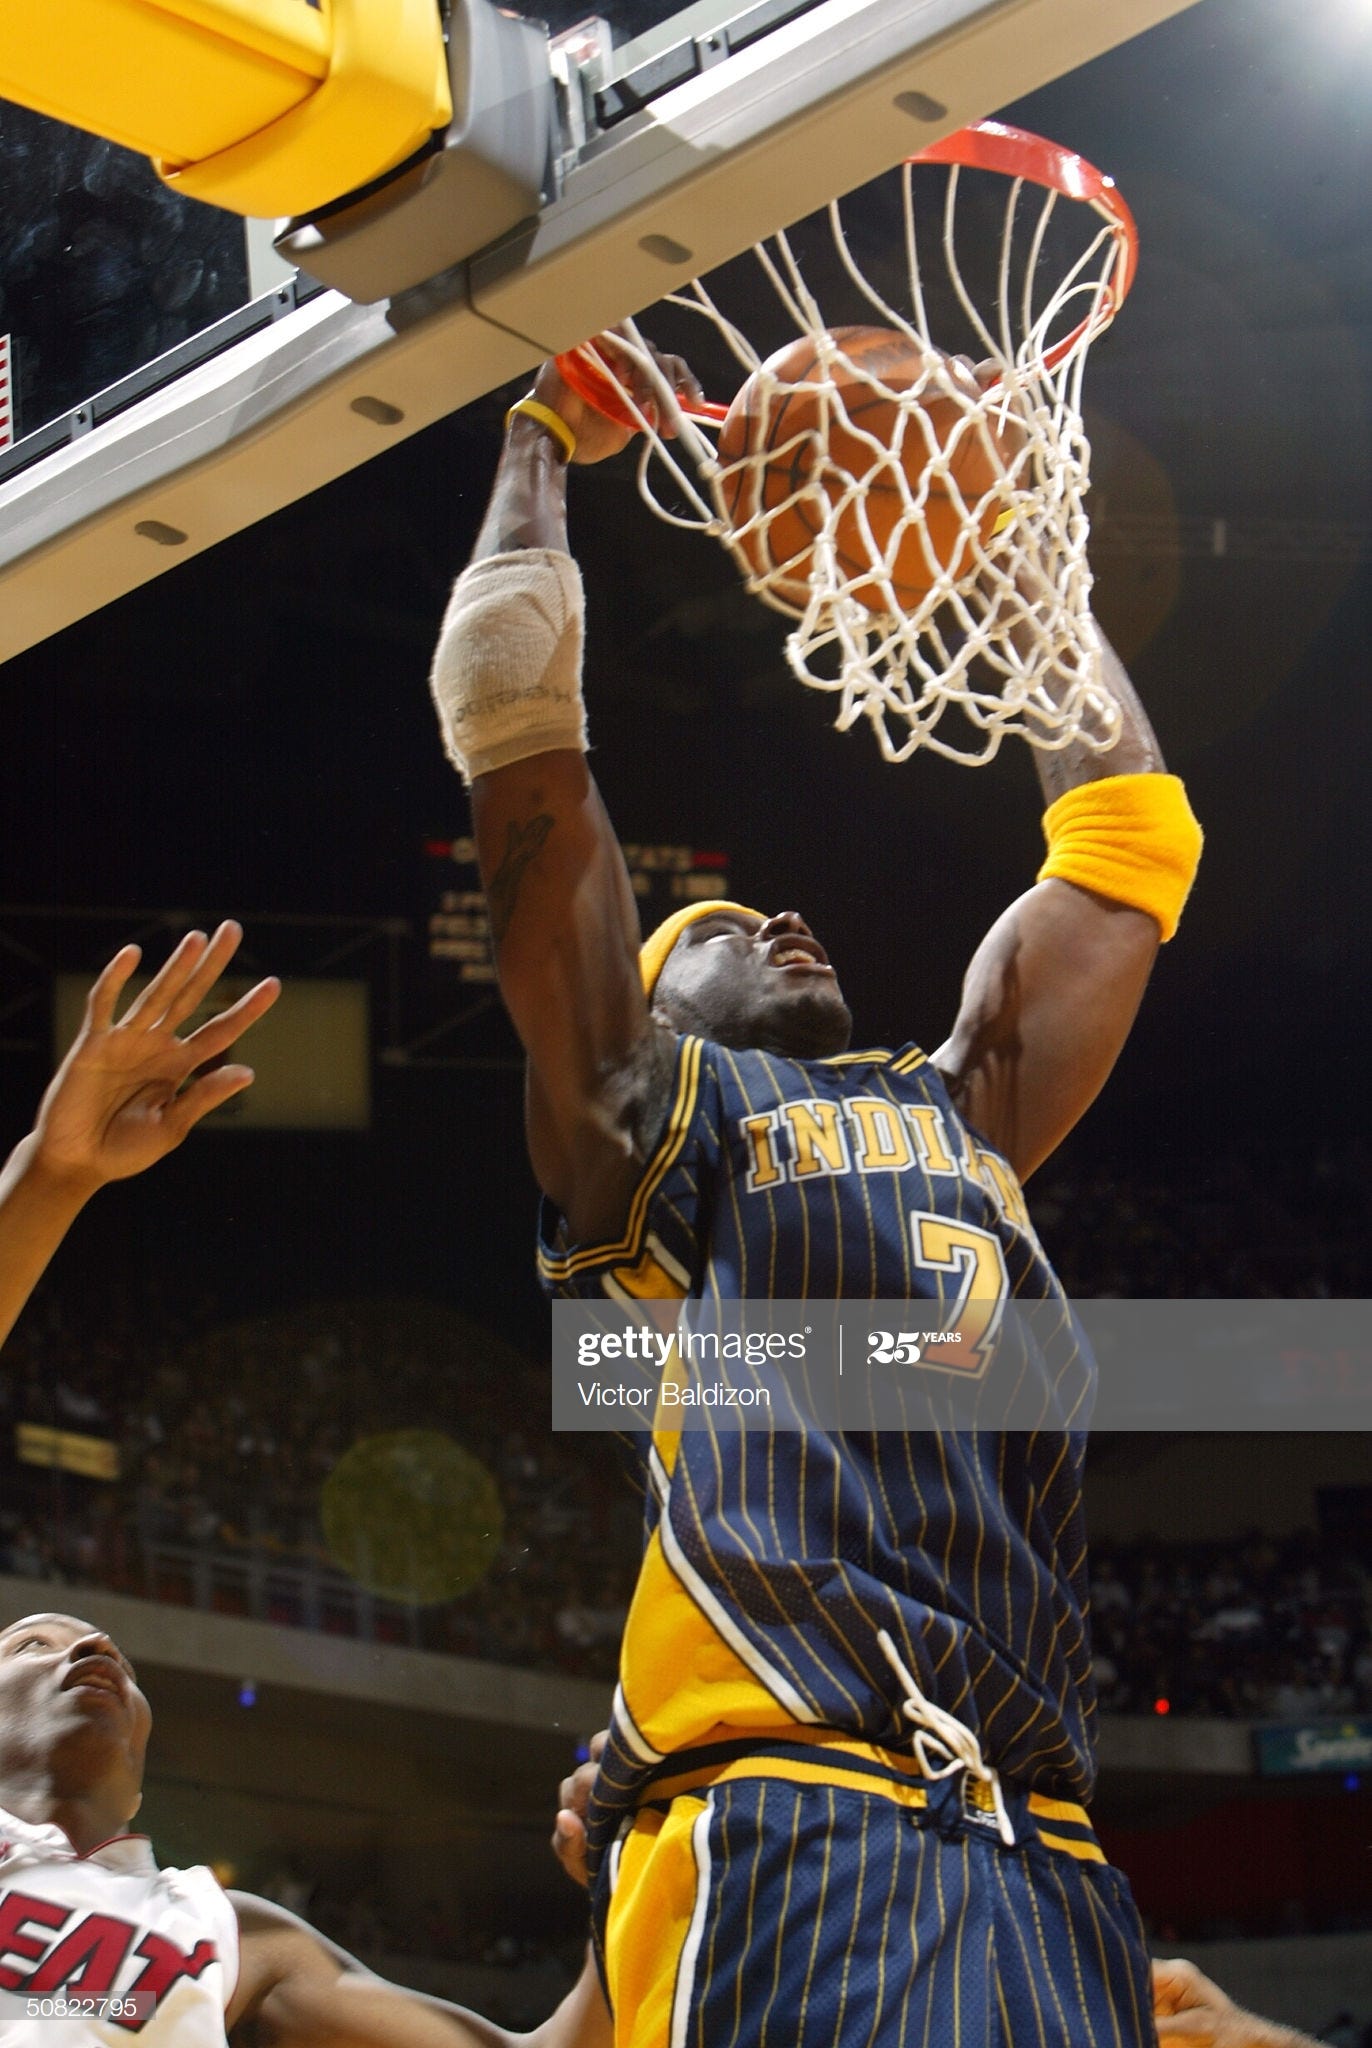 Jermaine O'Neal should have his Pacers jersey retired